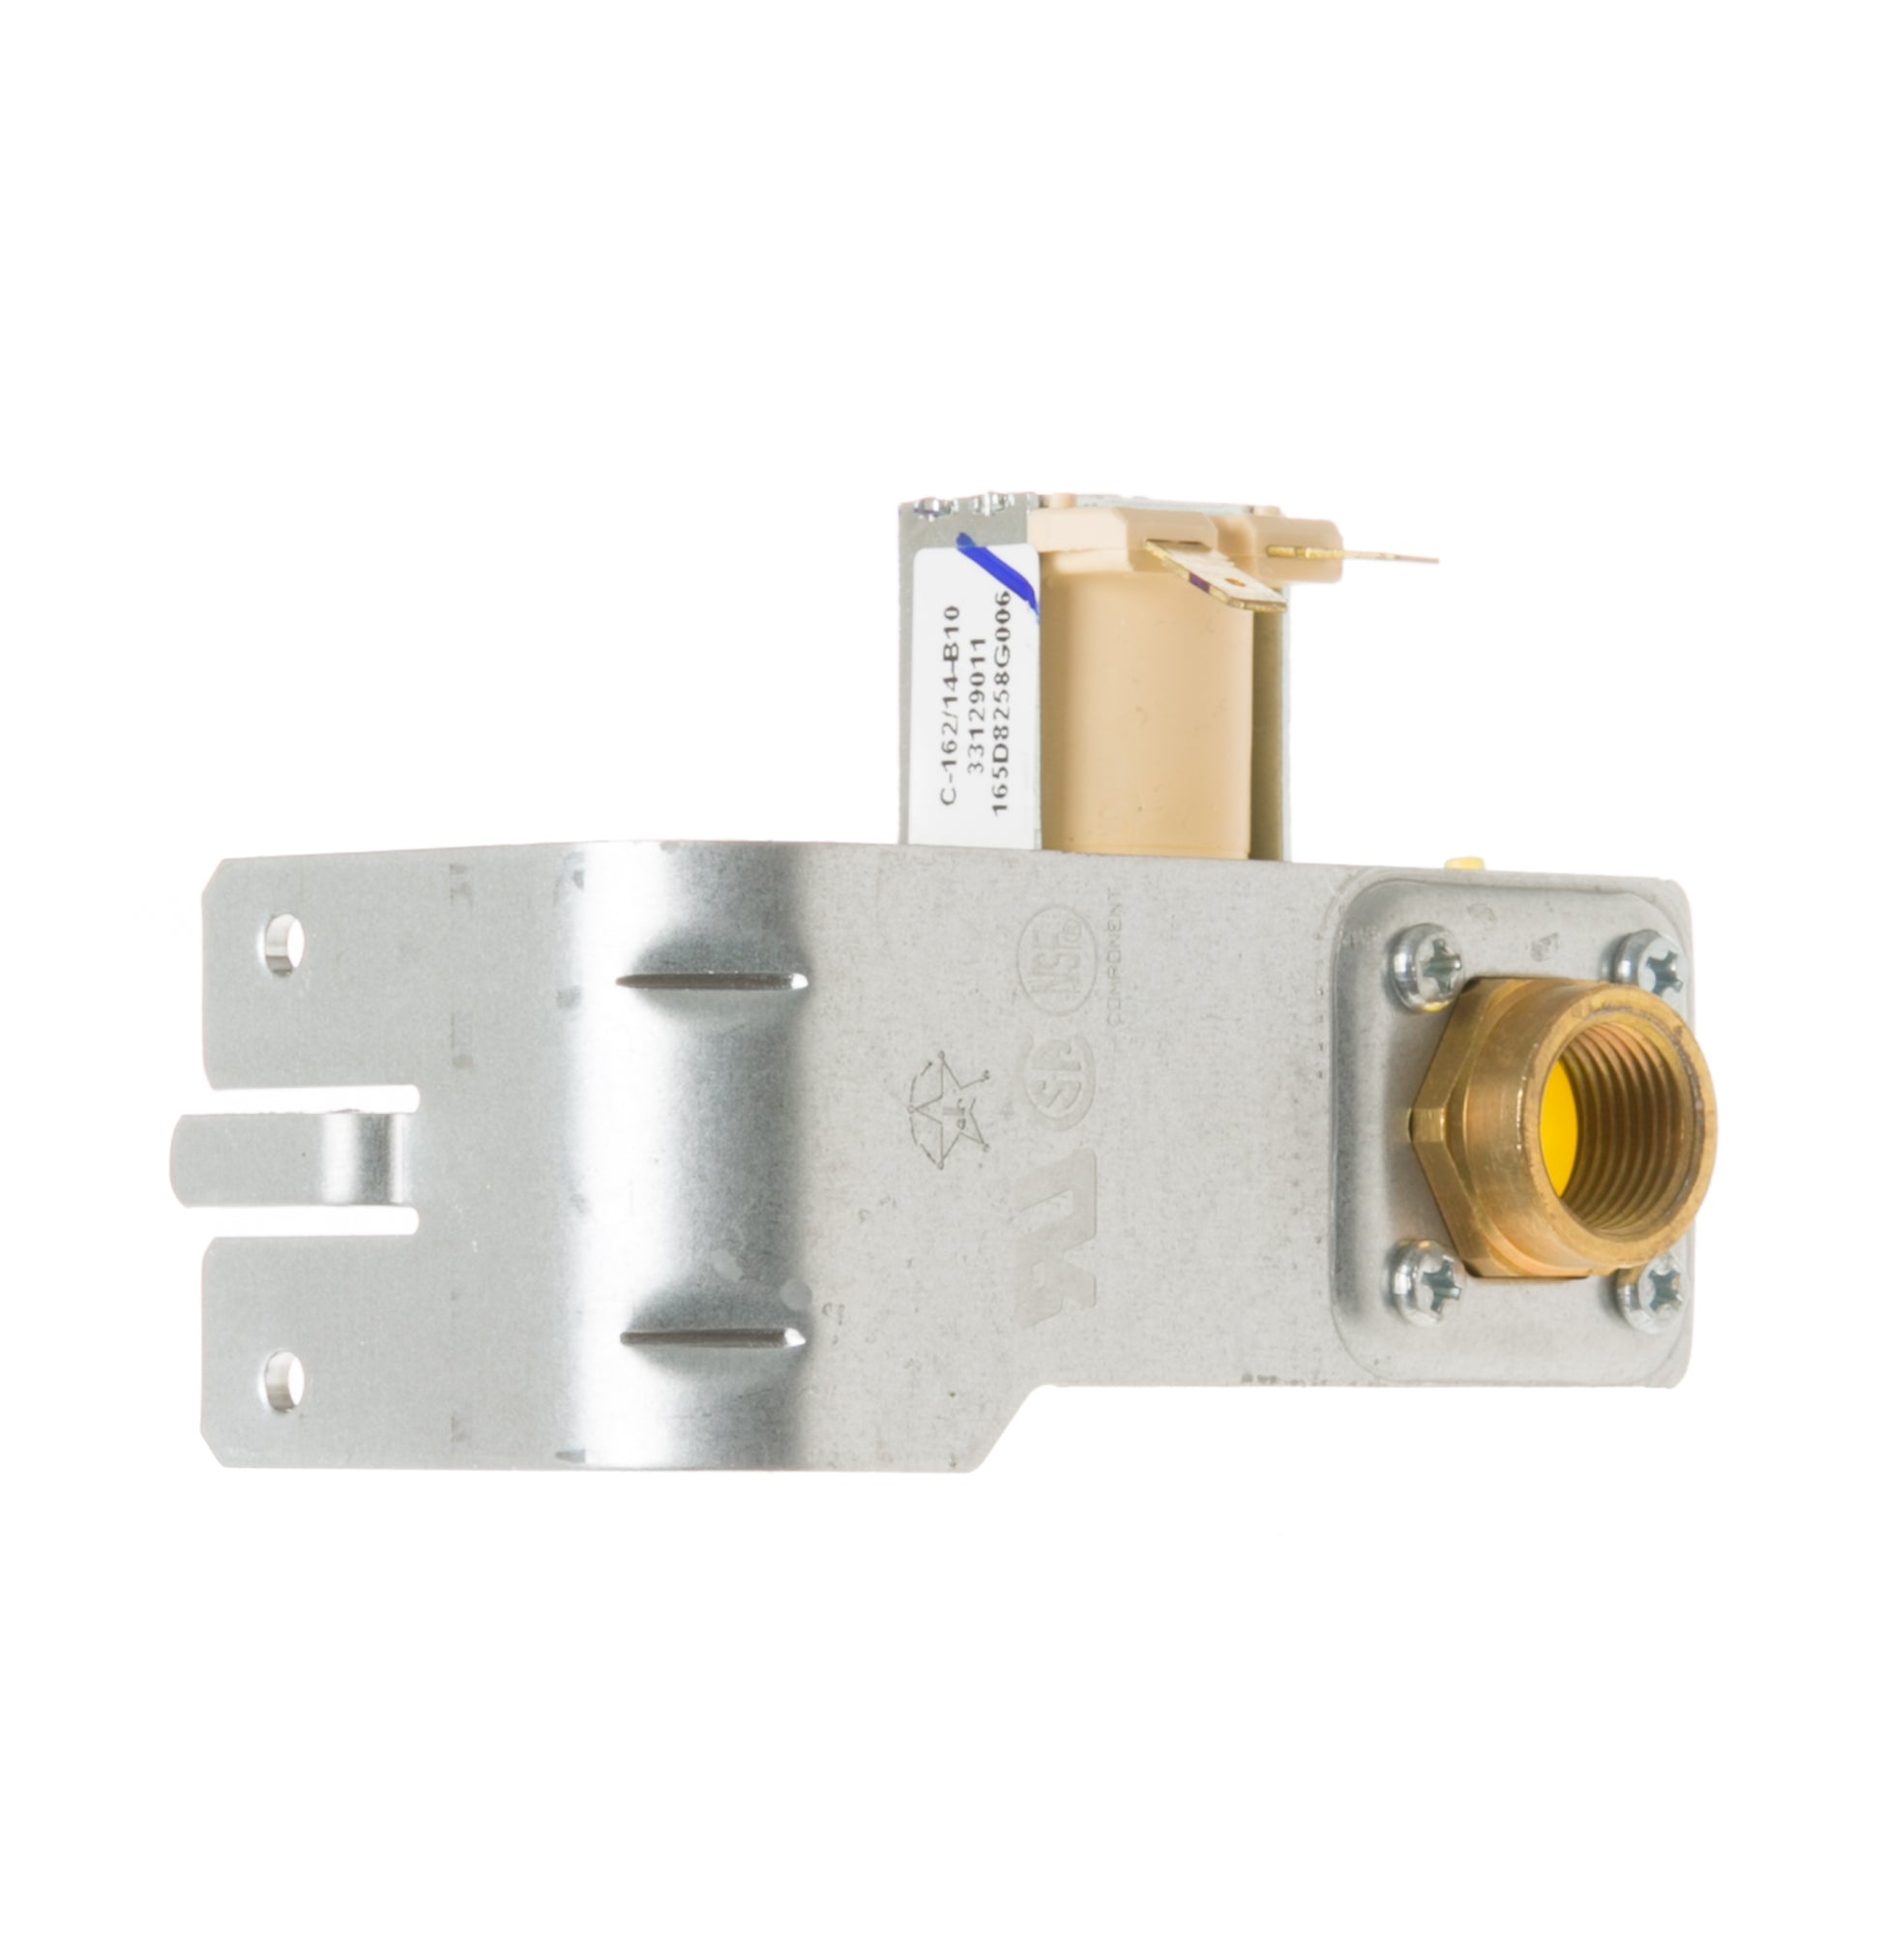 GE Dishwasher Water Inlet Valve - WG04F01991, Replaces: WG04F07991 AH11736773 EA11736773 EAP11736773 PS11736773 WD04M0065 WD04M65 INVERTEC